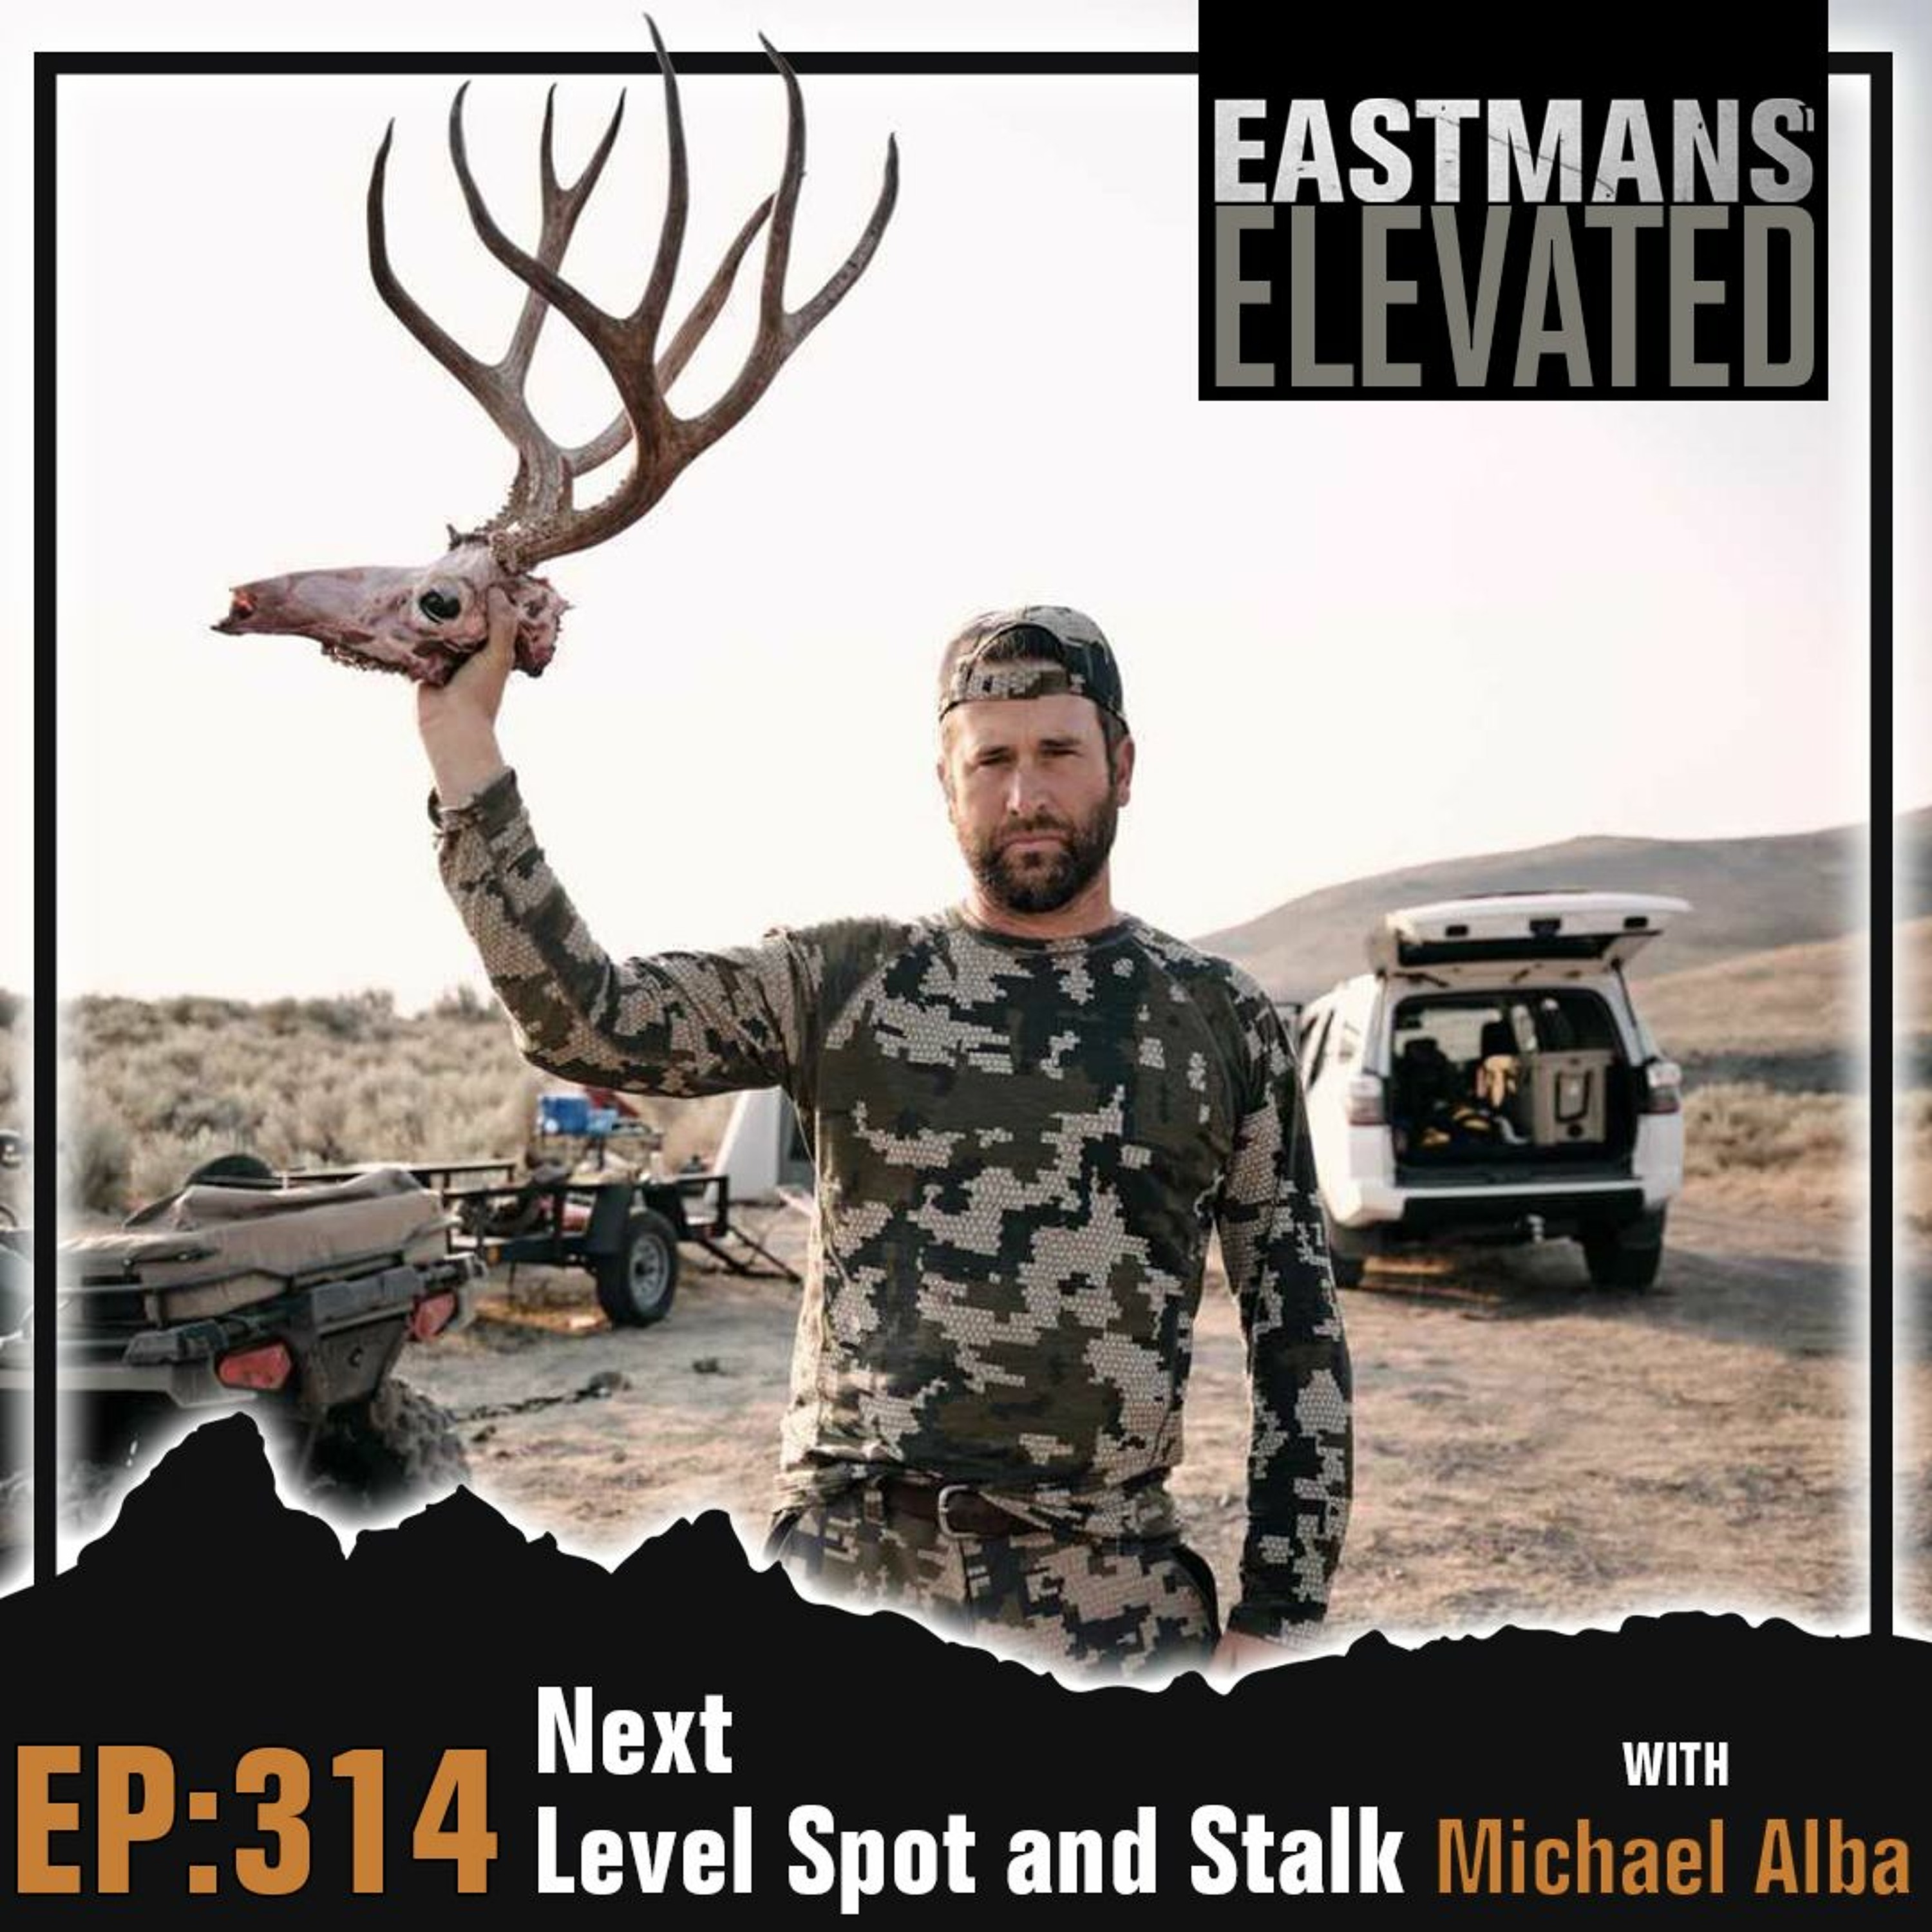 Episode 314: Next Level Spot and Stalk with Michael Alba